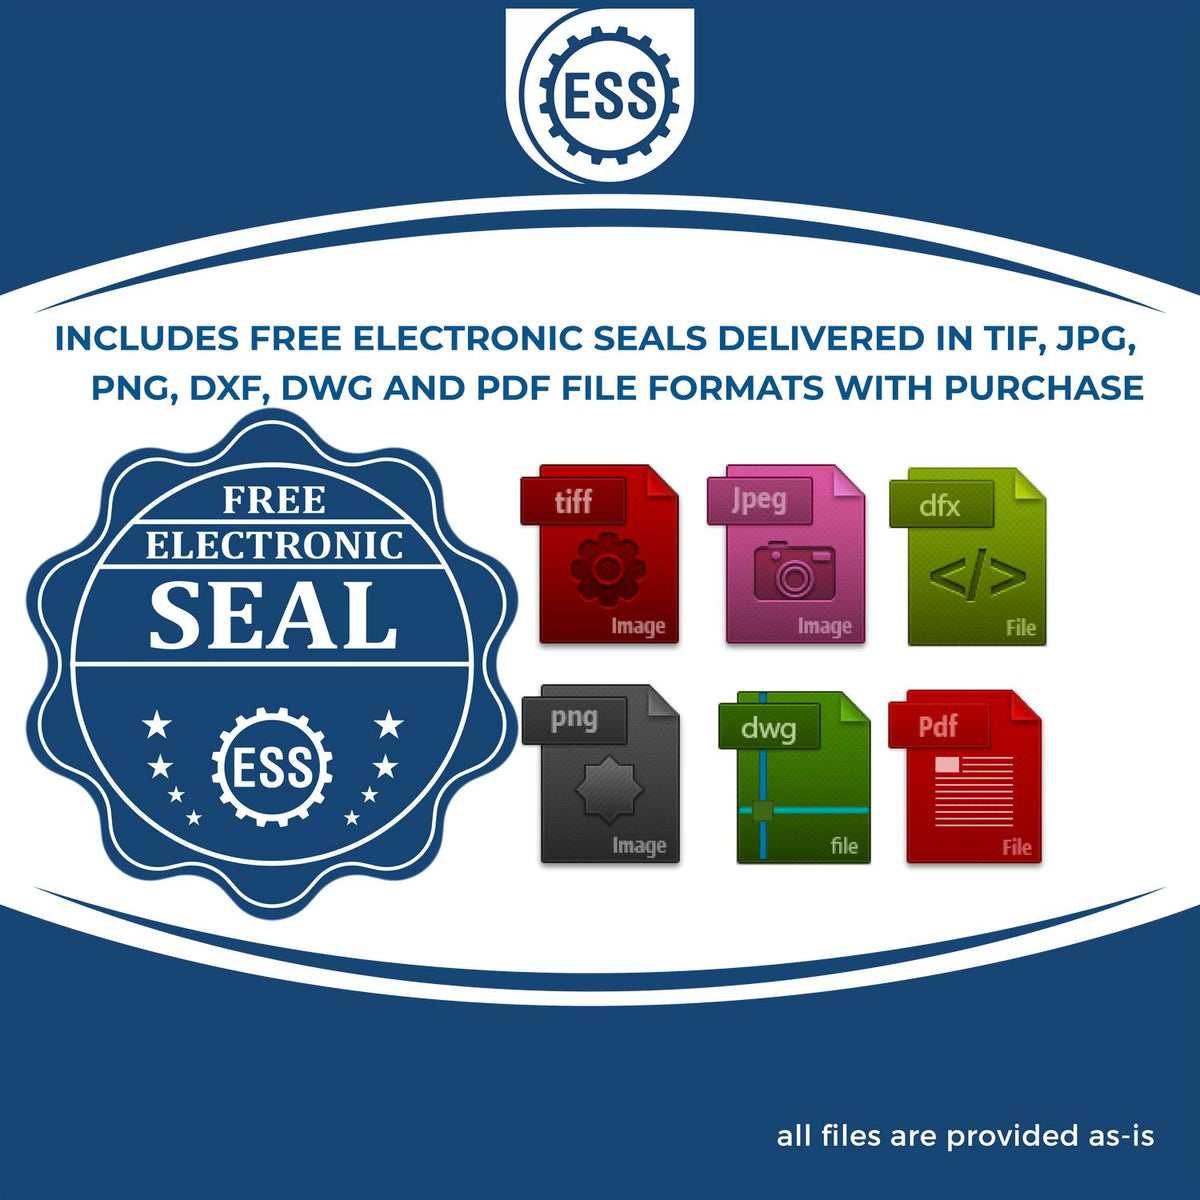 An infographic for the free electronic seal for the Gift South Carolina Engineer Seal illustrating the different file type icons such as DXF, DWG, TIF, JPG and PNG.